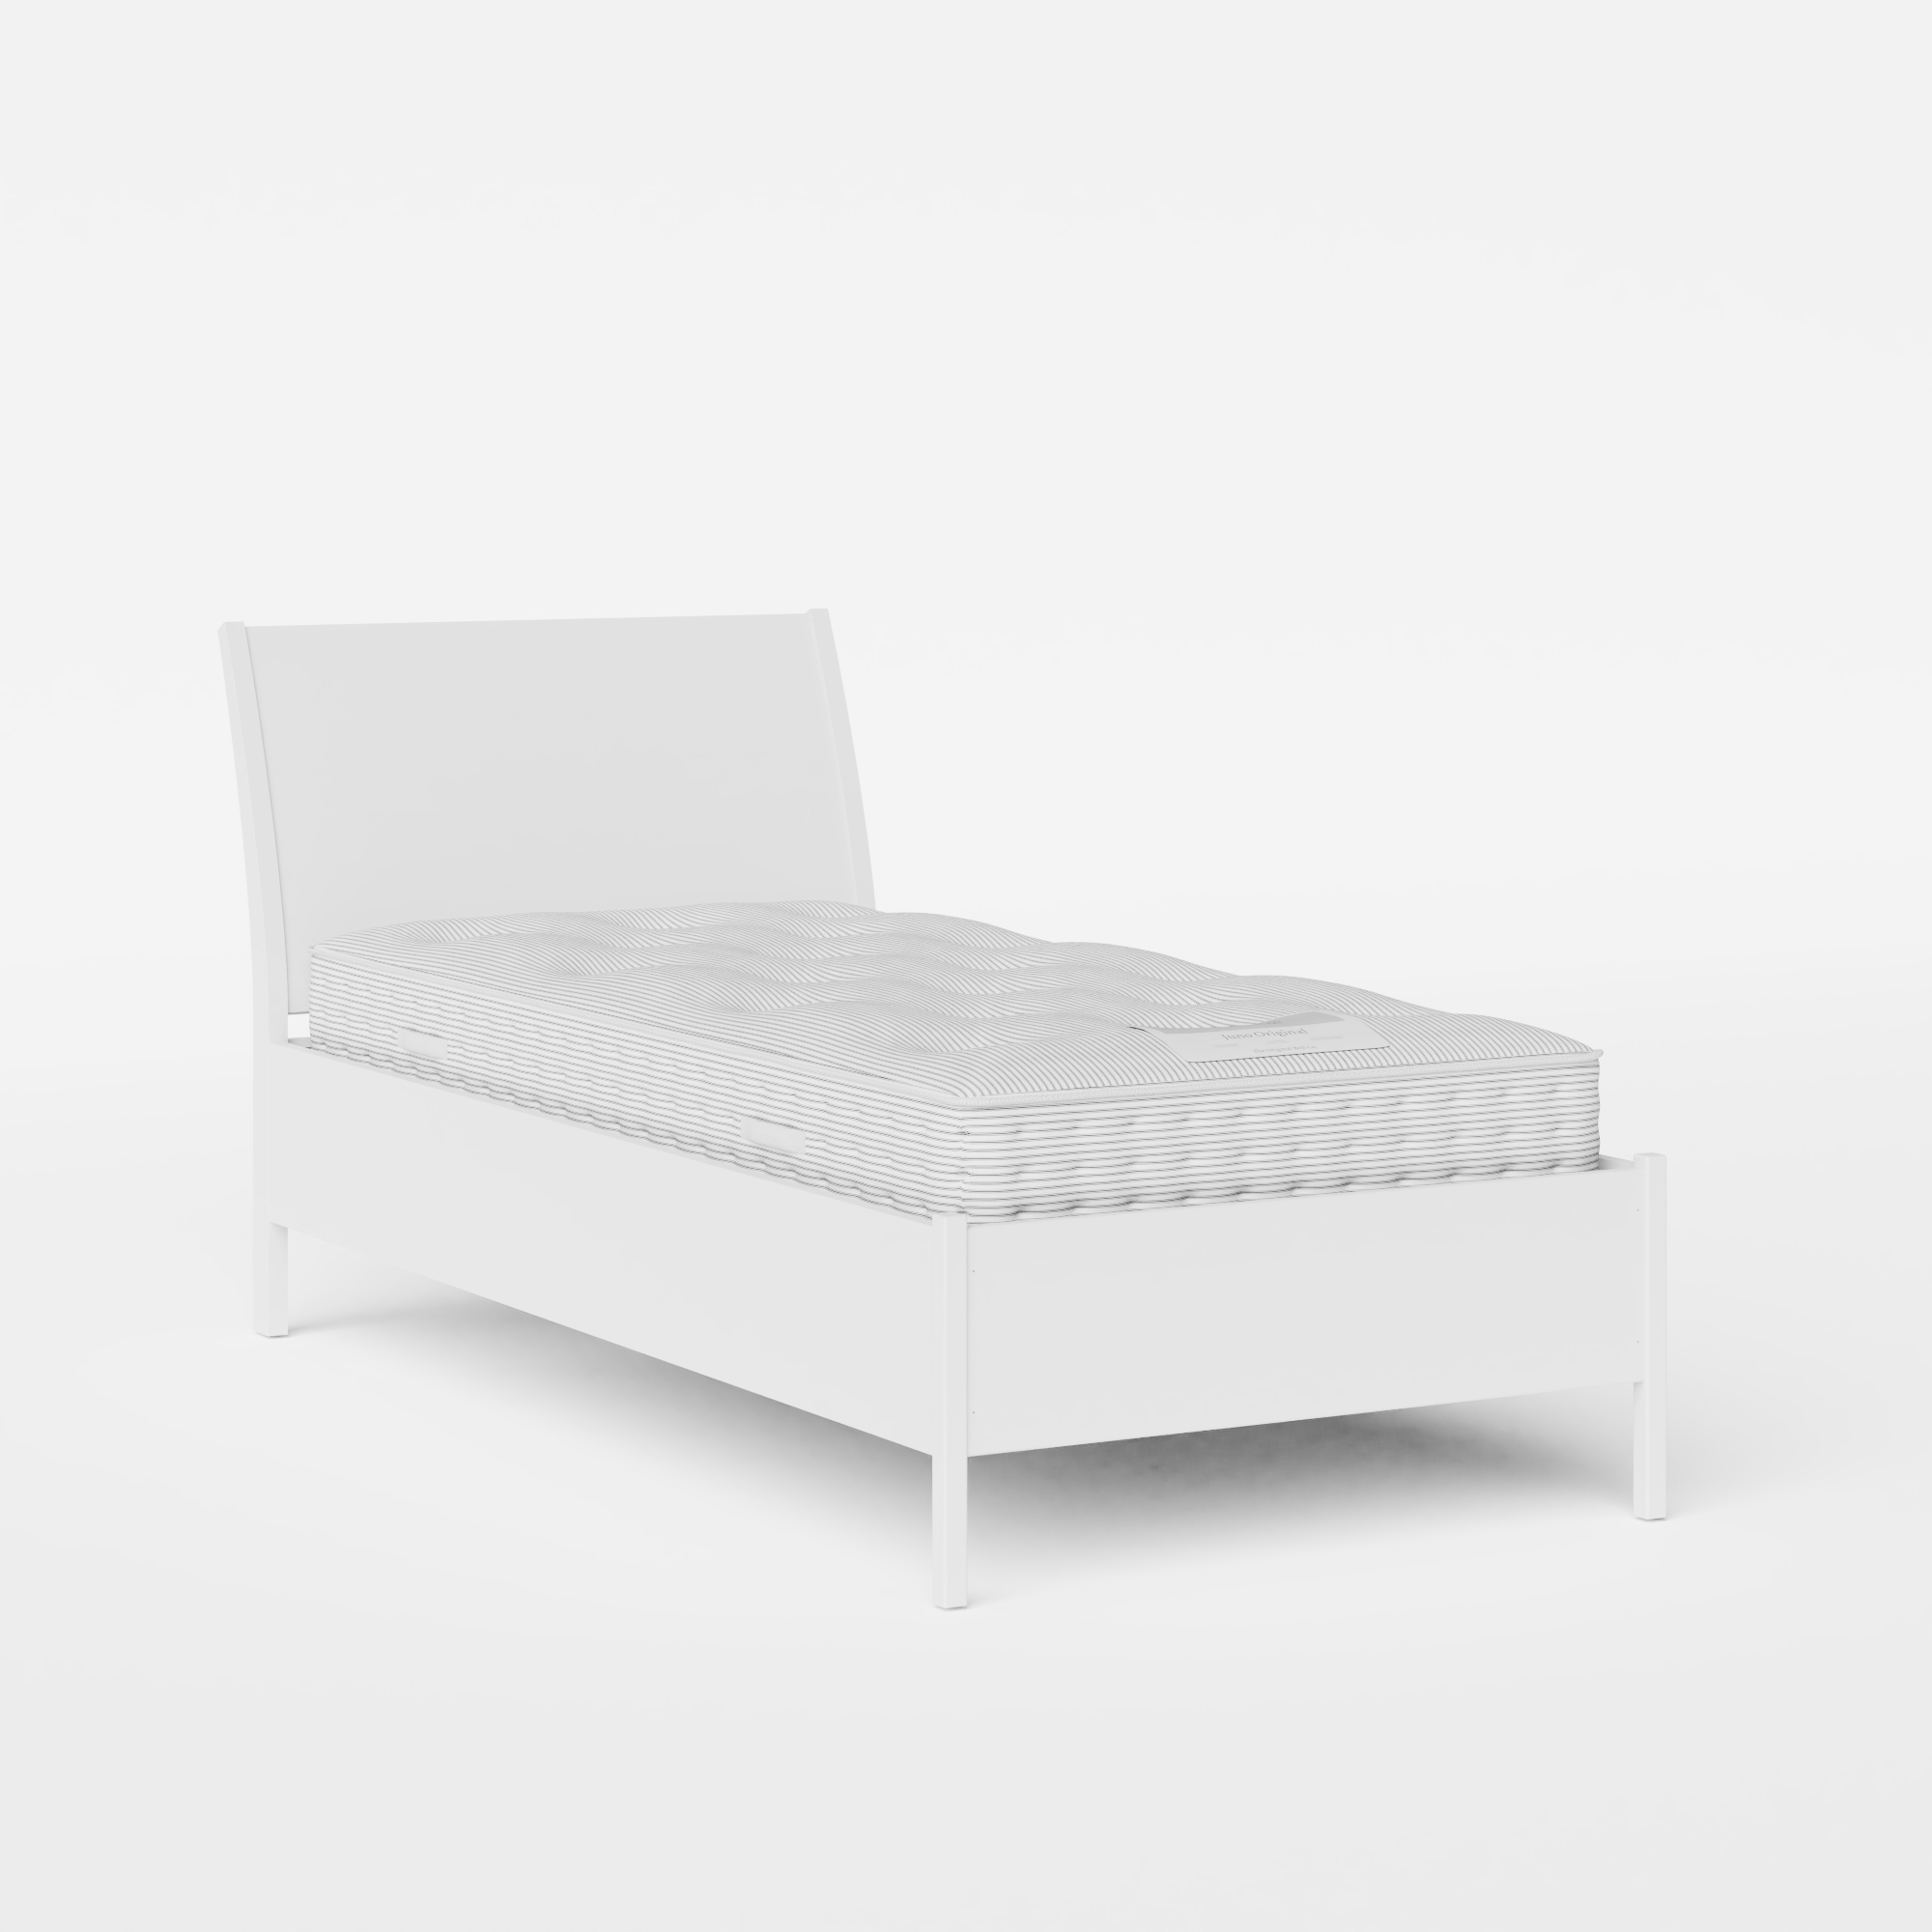 Hunt Painted single painted wood bed in white with Juno mattress